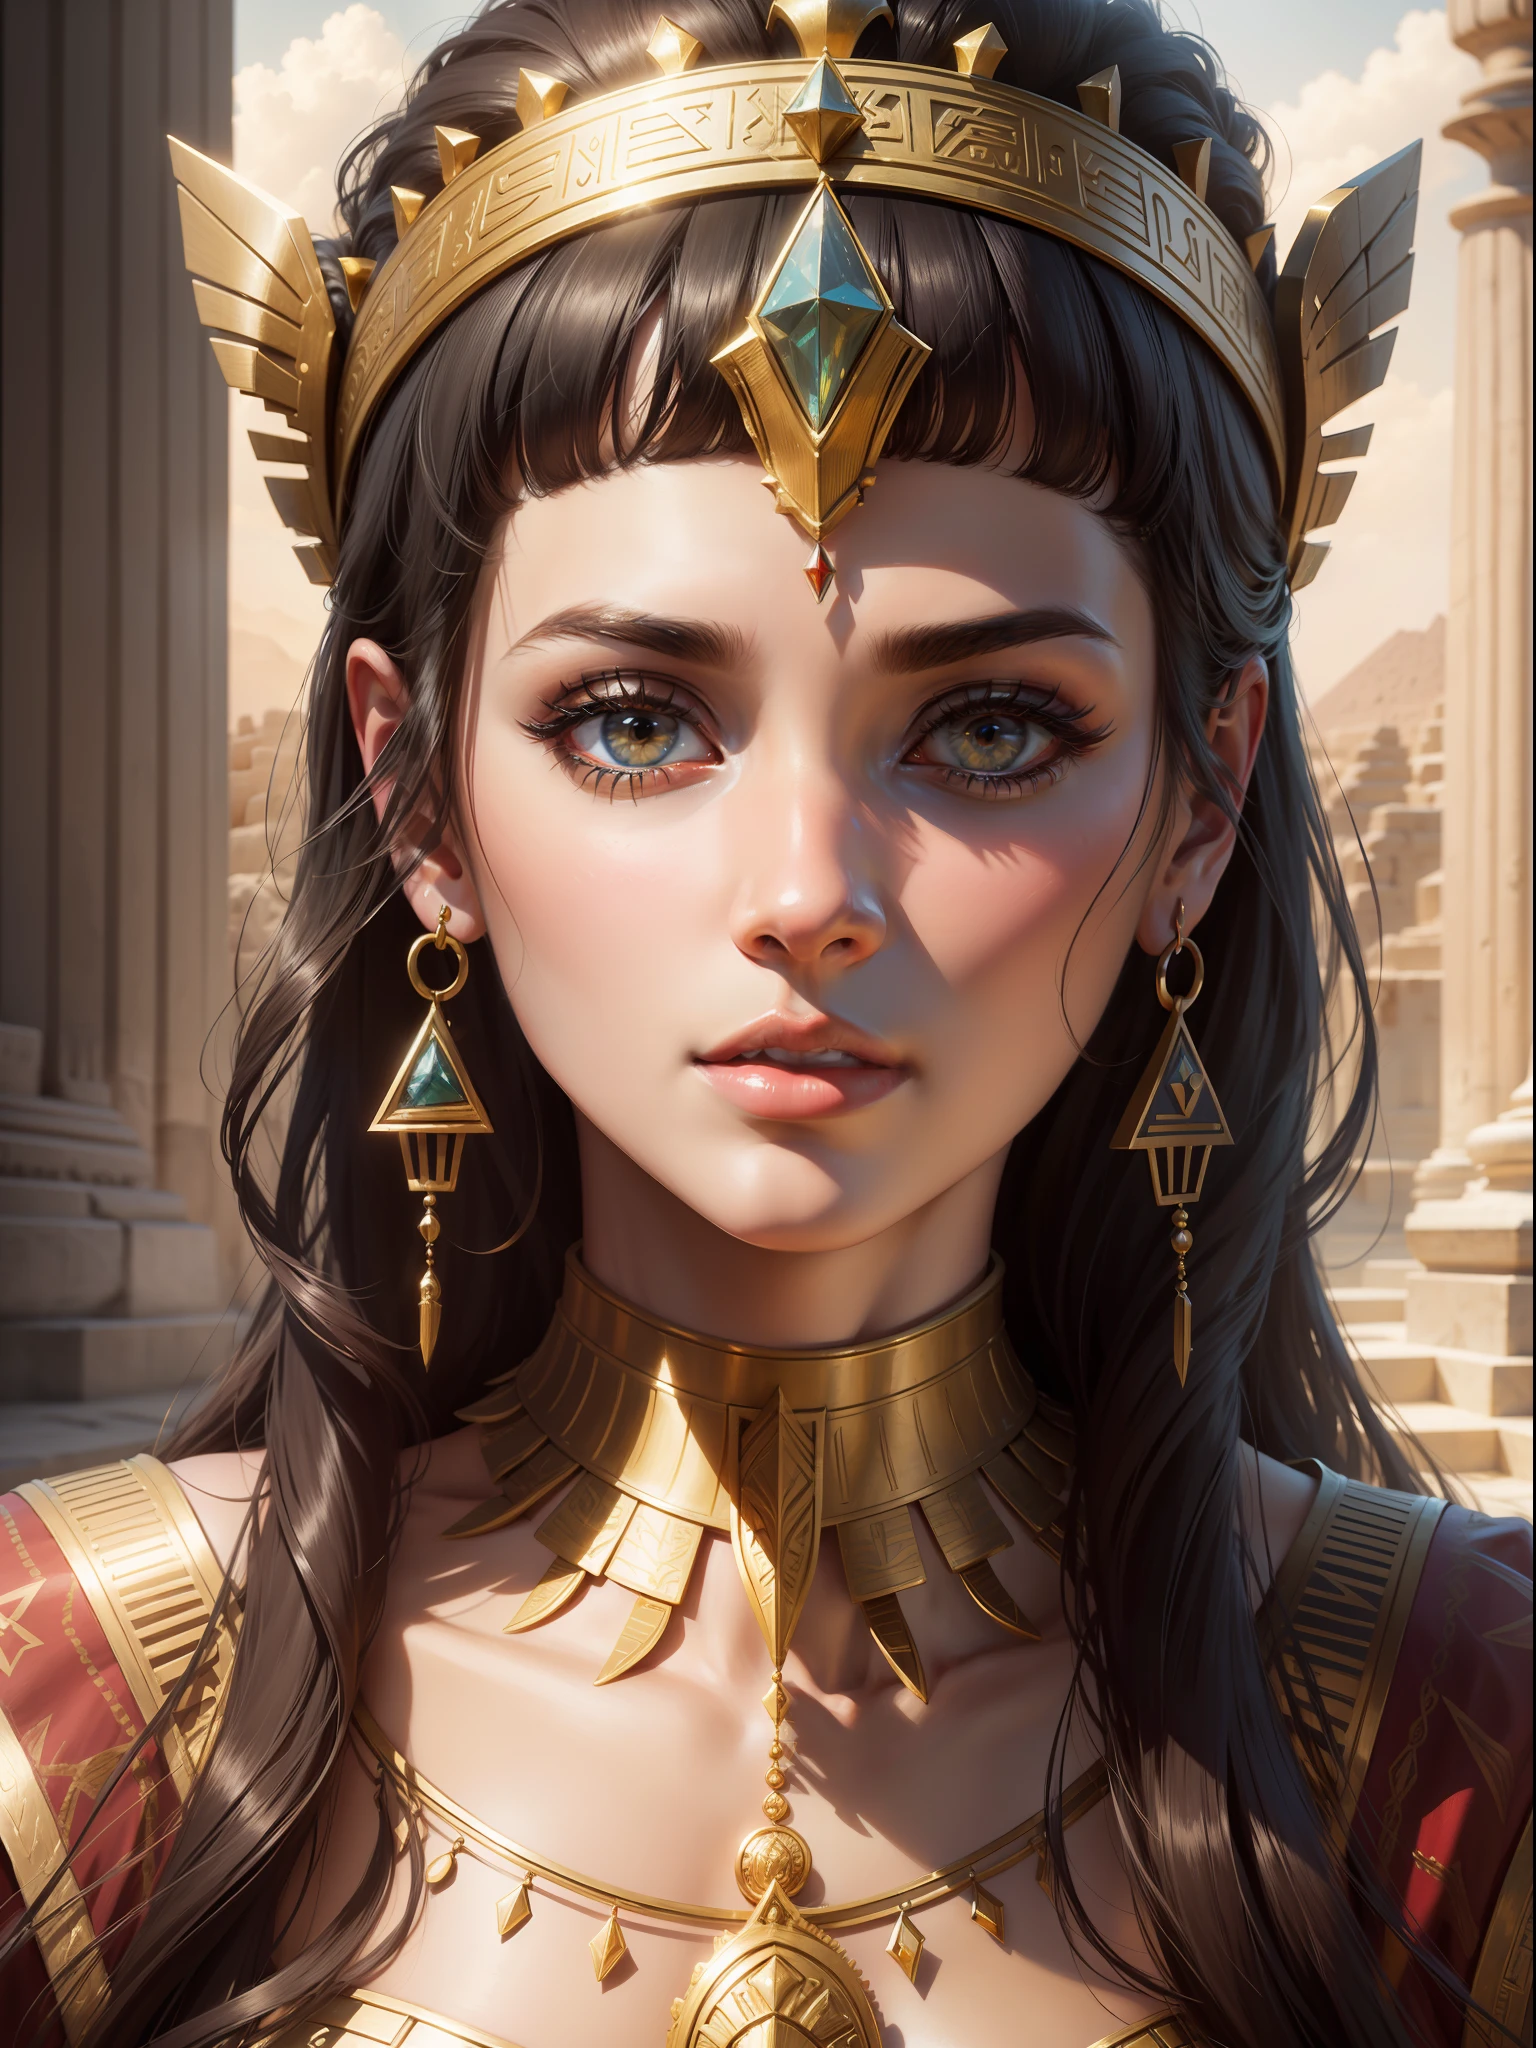 Draw colorful and painterly art inspired by the movie Cleopatra (1963). You should depict the majestic and mysterious atmosphere of Ancient Egypt. Try to convey the wealth and luxury of the time period. The main character, Cleopatra (with the face of actress Elizabeth Taylor at 20 years old), should be depicted with bright and elegant clothes that emphasize her status as a queen. The background can be an image of the pyramids, Egyptian temples and ancient cities. Other characters such as Julius Caesar and Mark Antony may also be present to emphasize the importance of their role in the plot. Don't forget to add details and textures to create realism and depth. Art, 4K resolution , photorealistic rendering, using Cinema 4D.extremely detailed, amazing, fine detail, rich colors, hyper realistic